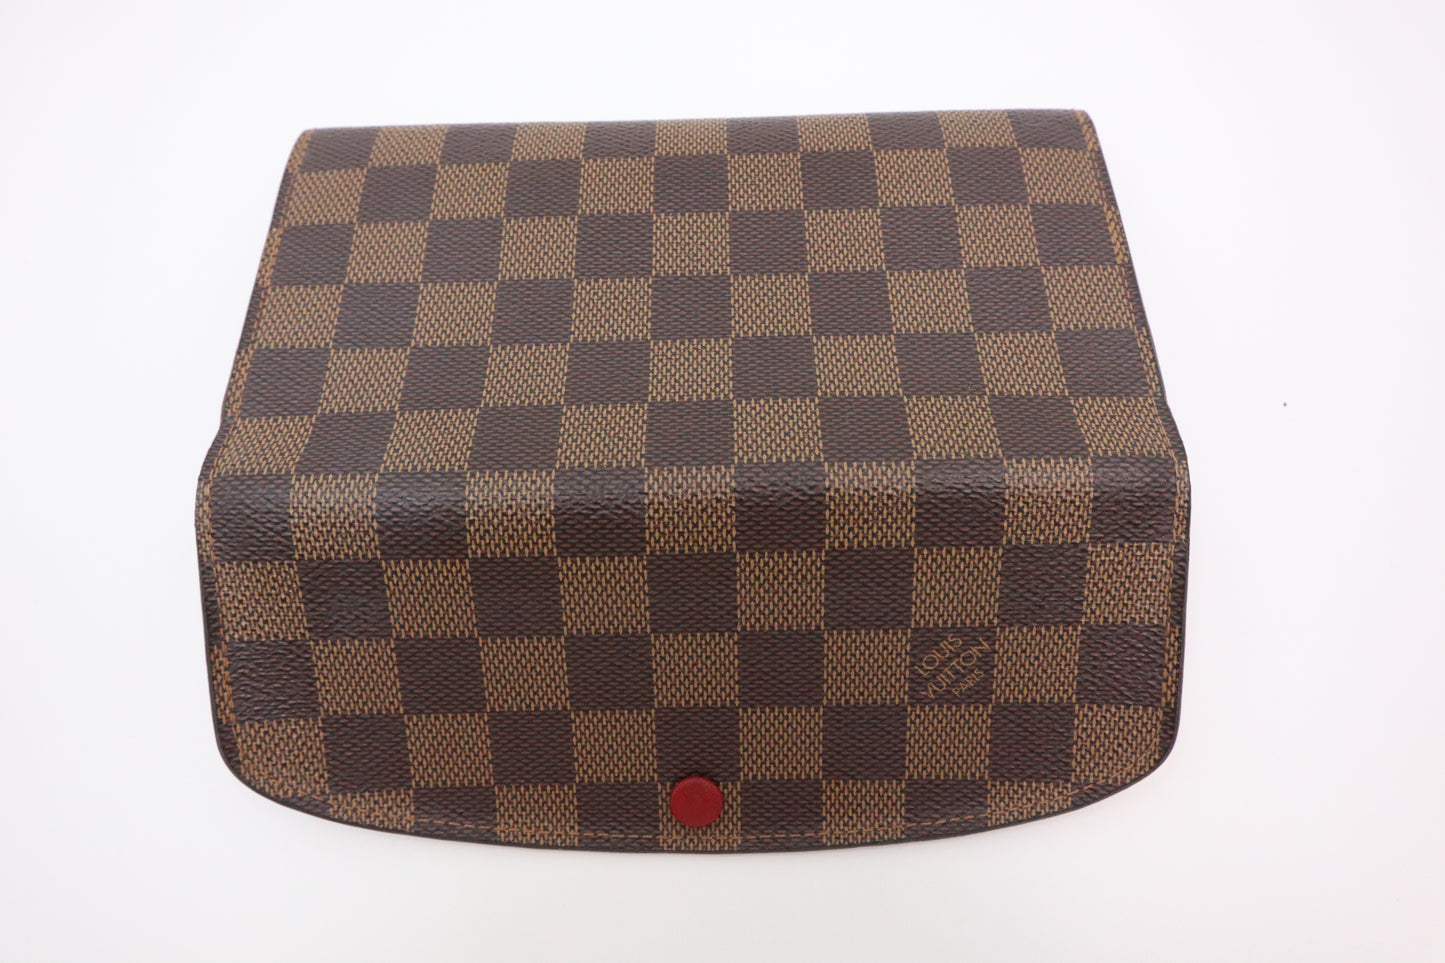 Louis Vuitton Emilie Wallet in Damier Graphite and Red Leather